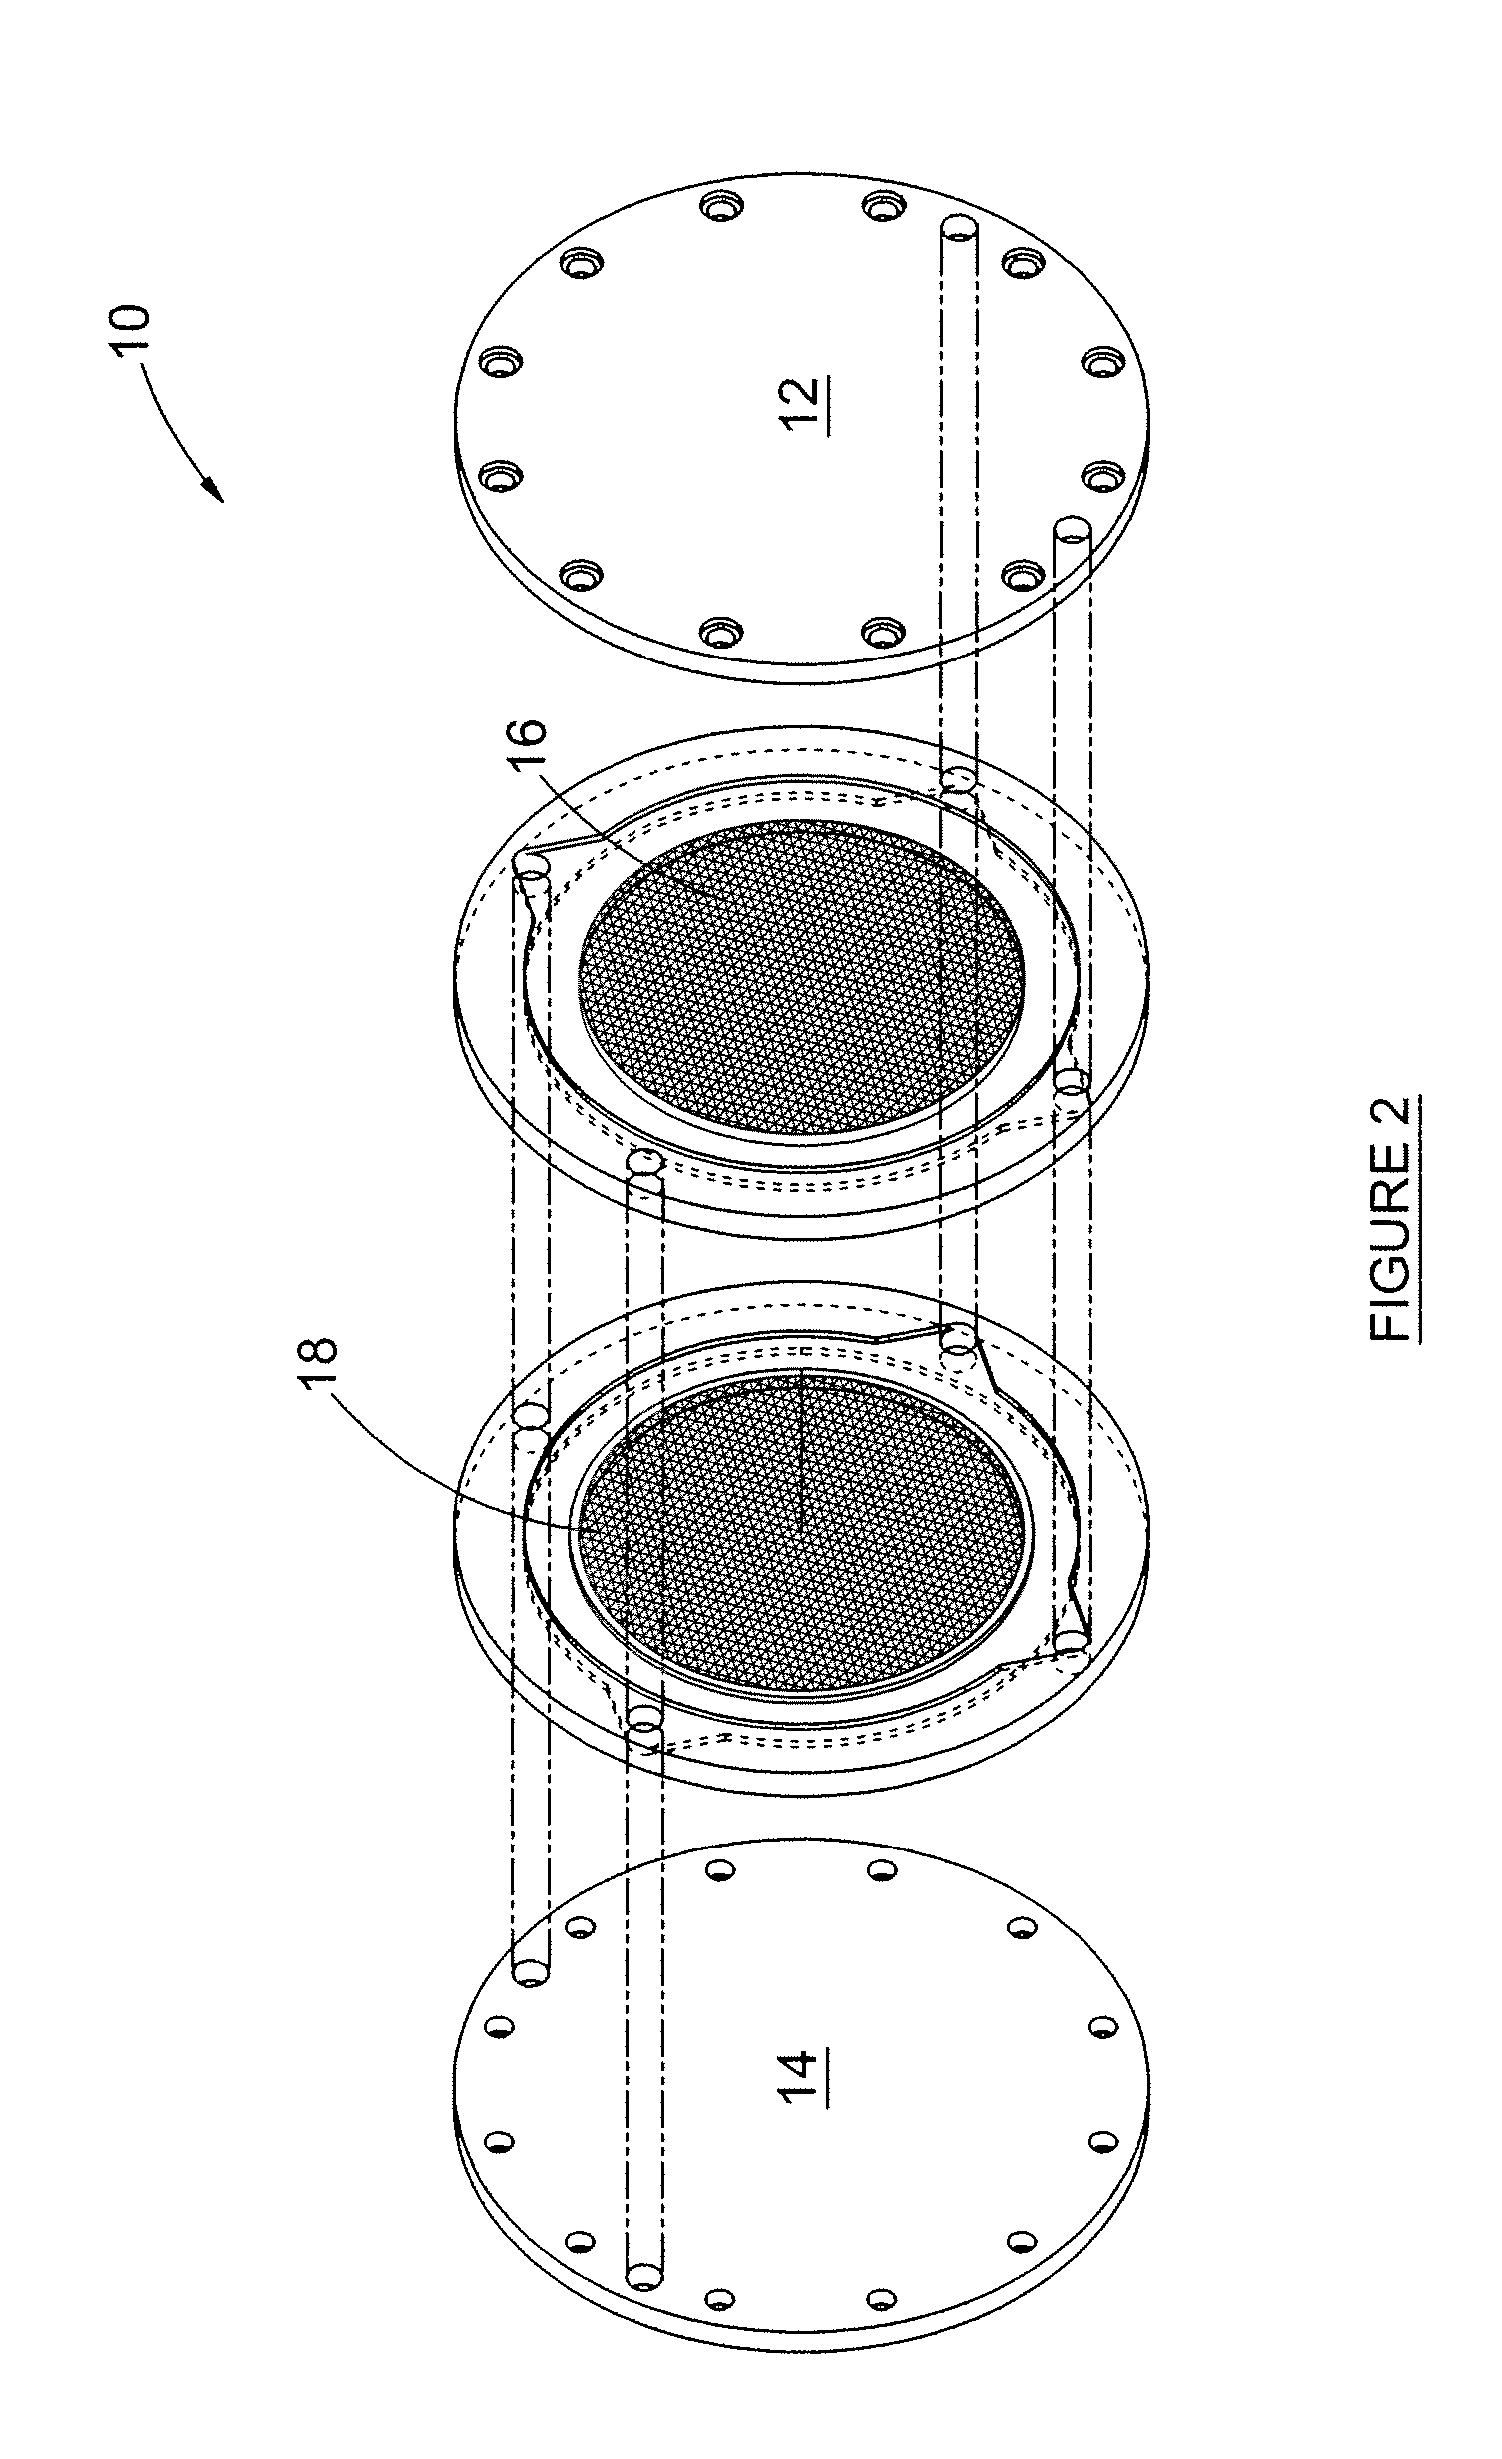 Method and apparatus for producing gas